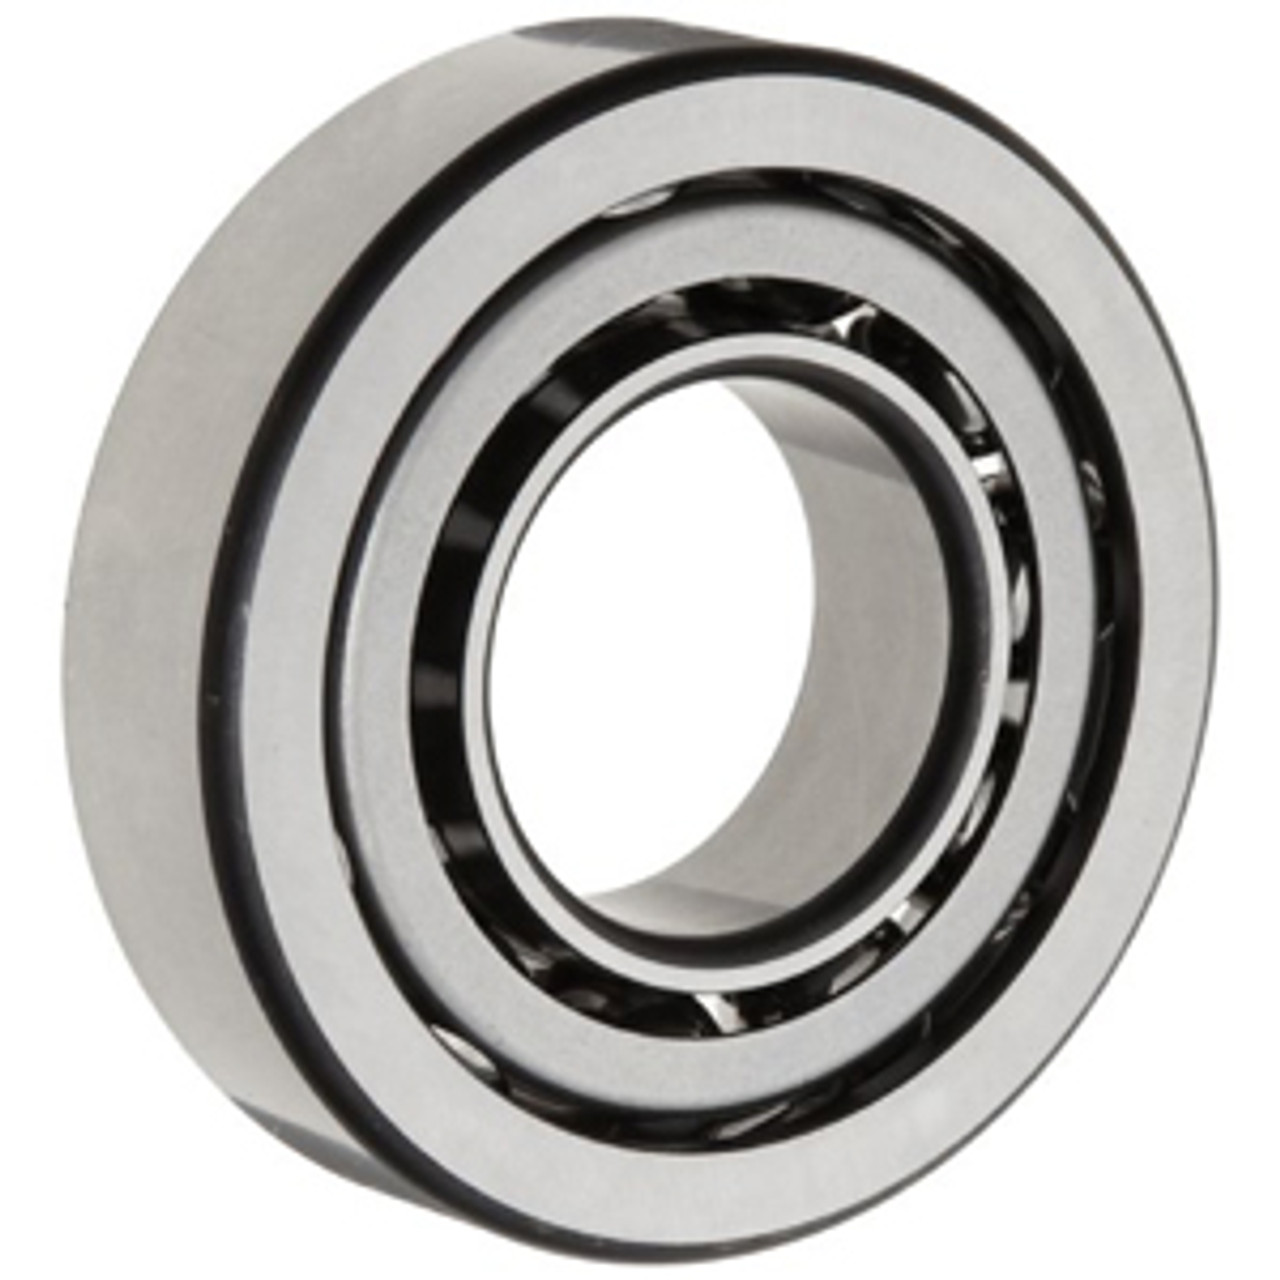 Nylon cage 15°Contact Angle P4 ABEC-7 DB Arrangement Back to Back DALUO 7004CTYNDBLP4 Precision Angular Contact Ball Bearings 